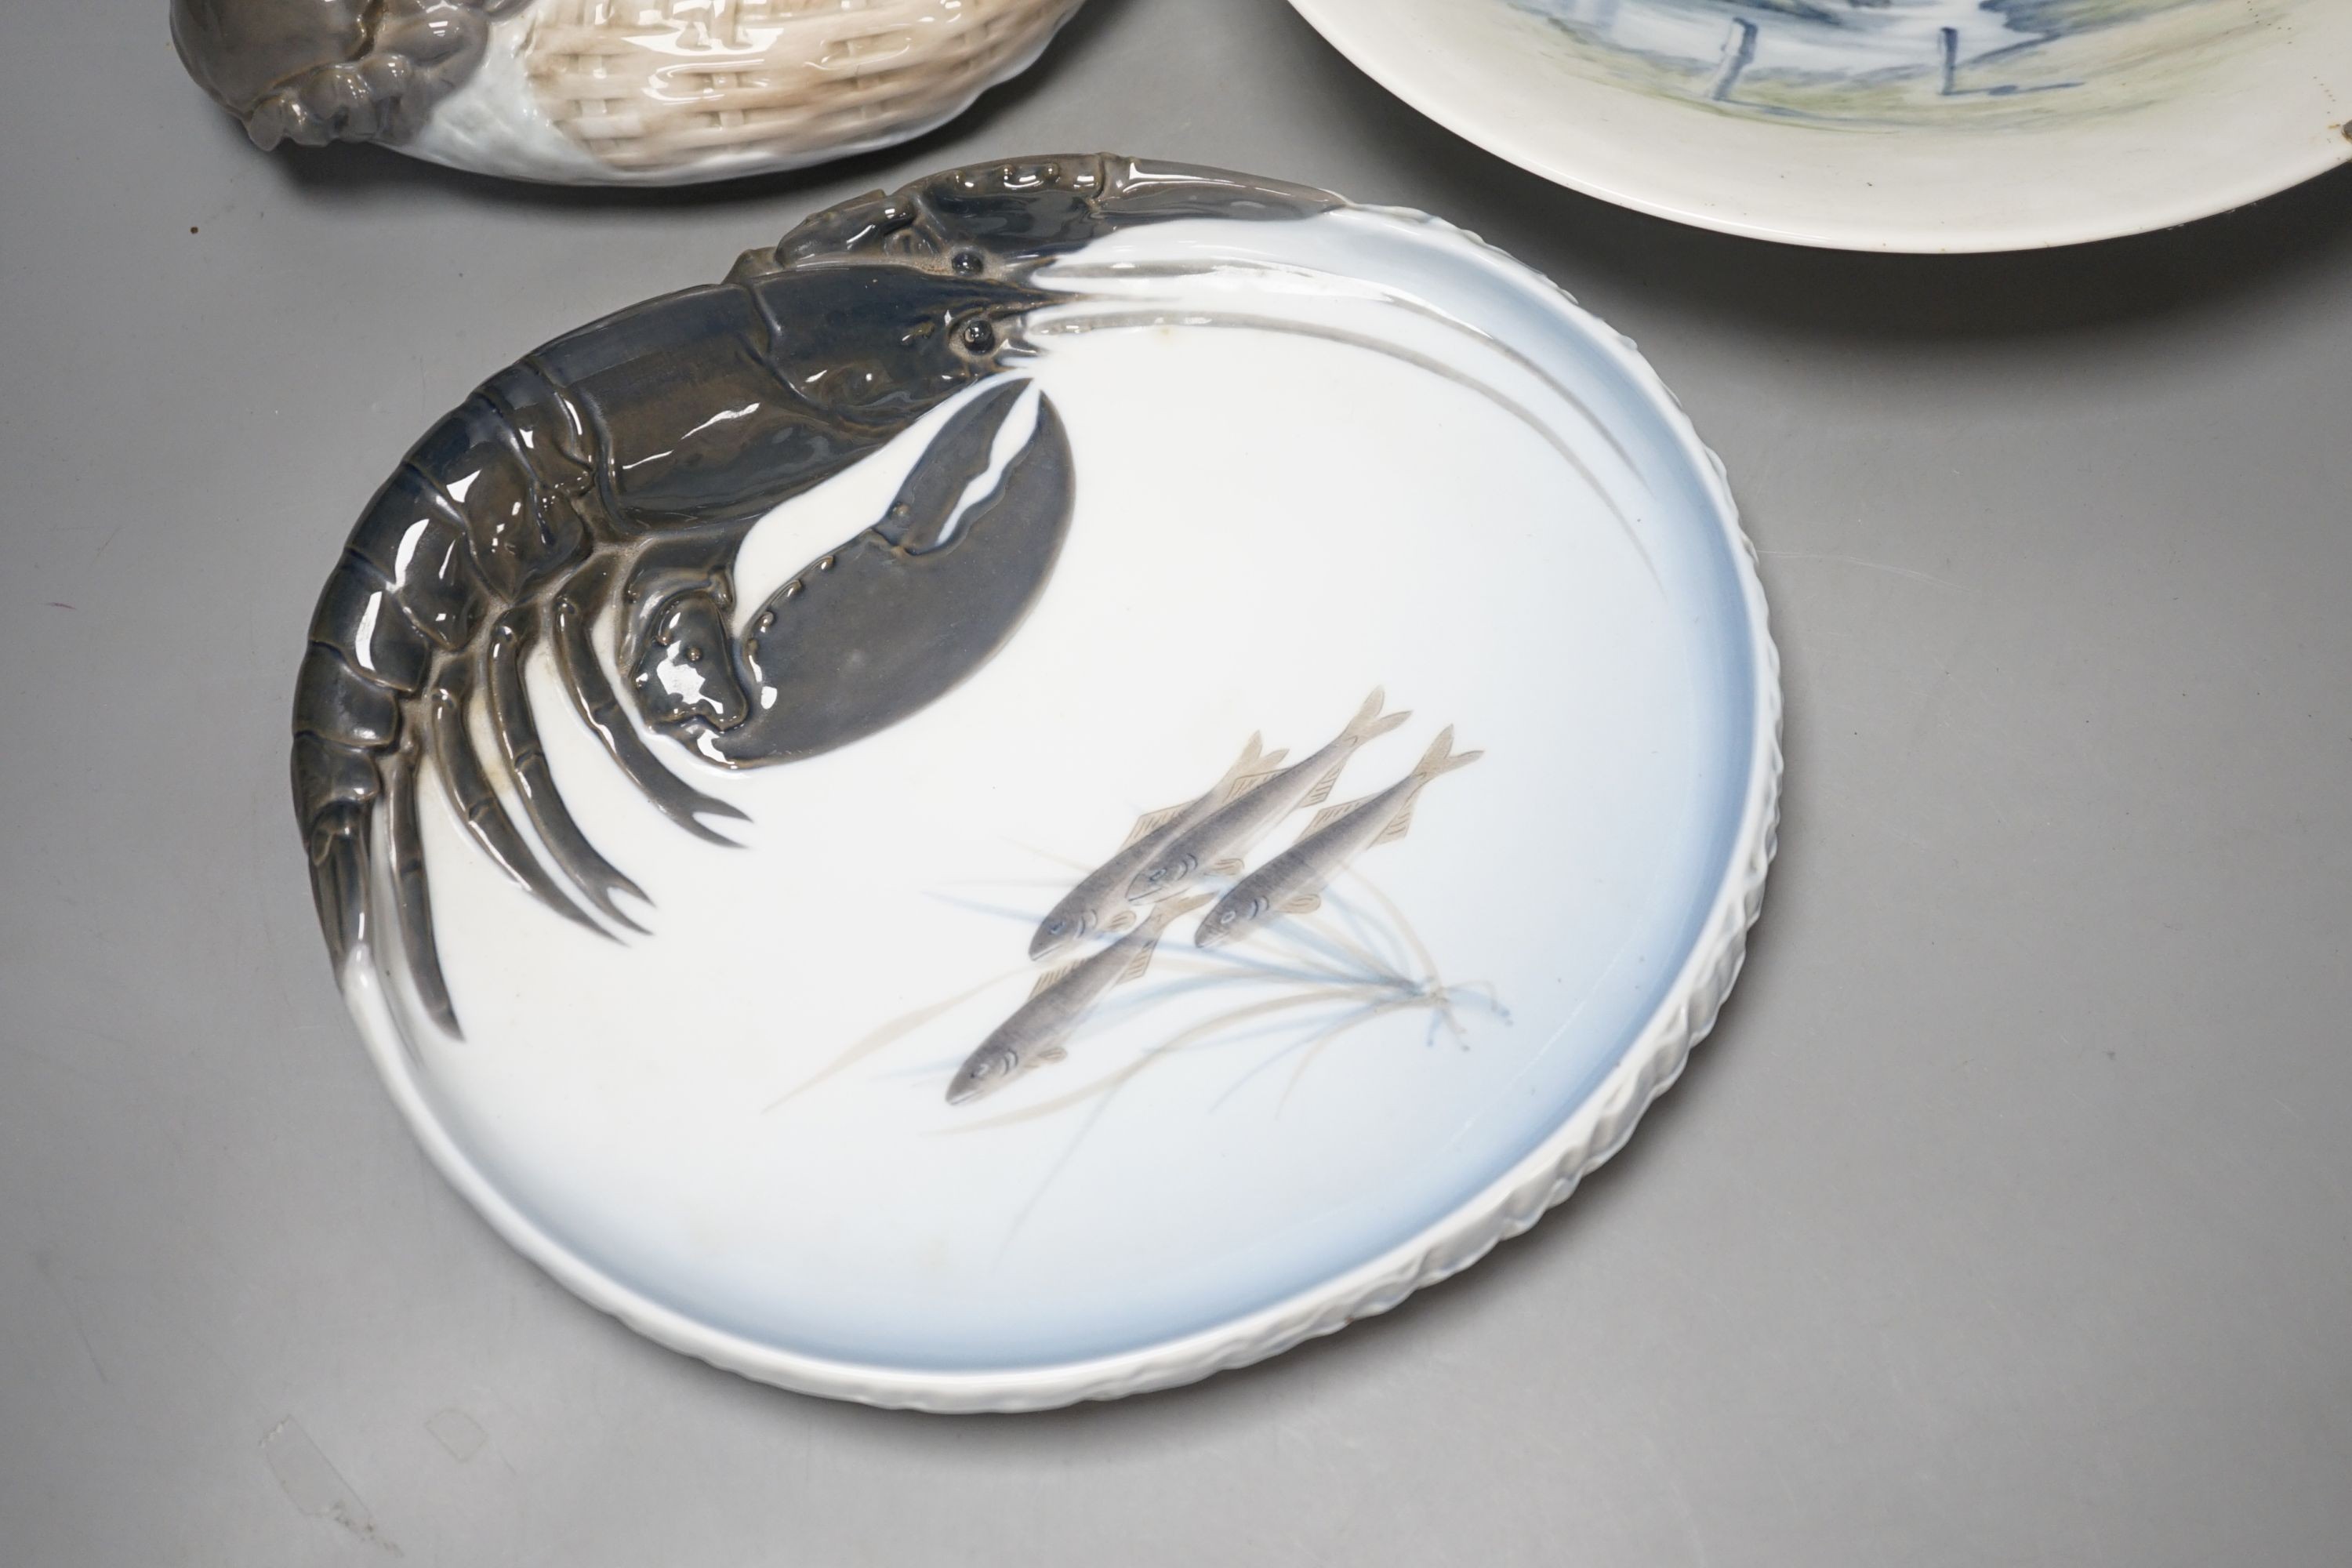 Three Royal Copenhagen dishes, one decorated with a crab, another with a lobster